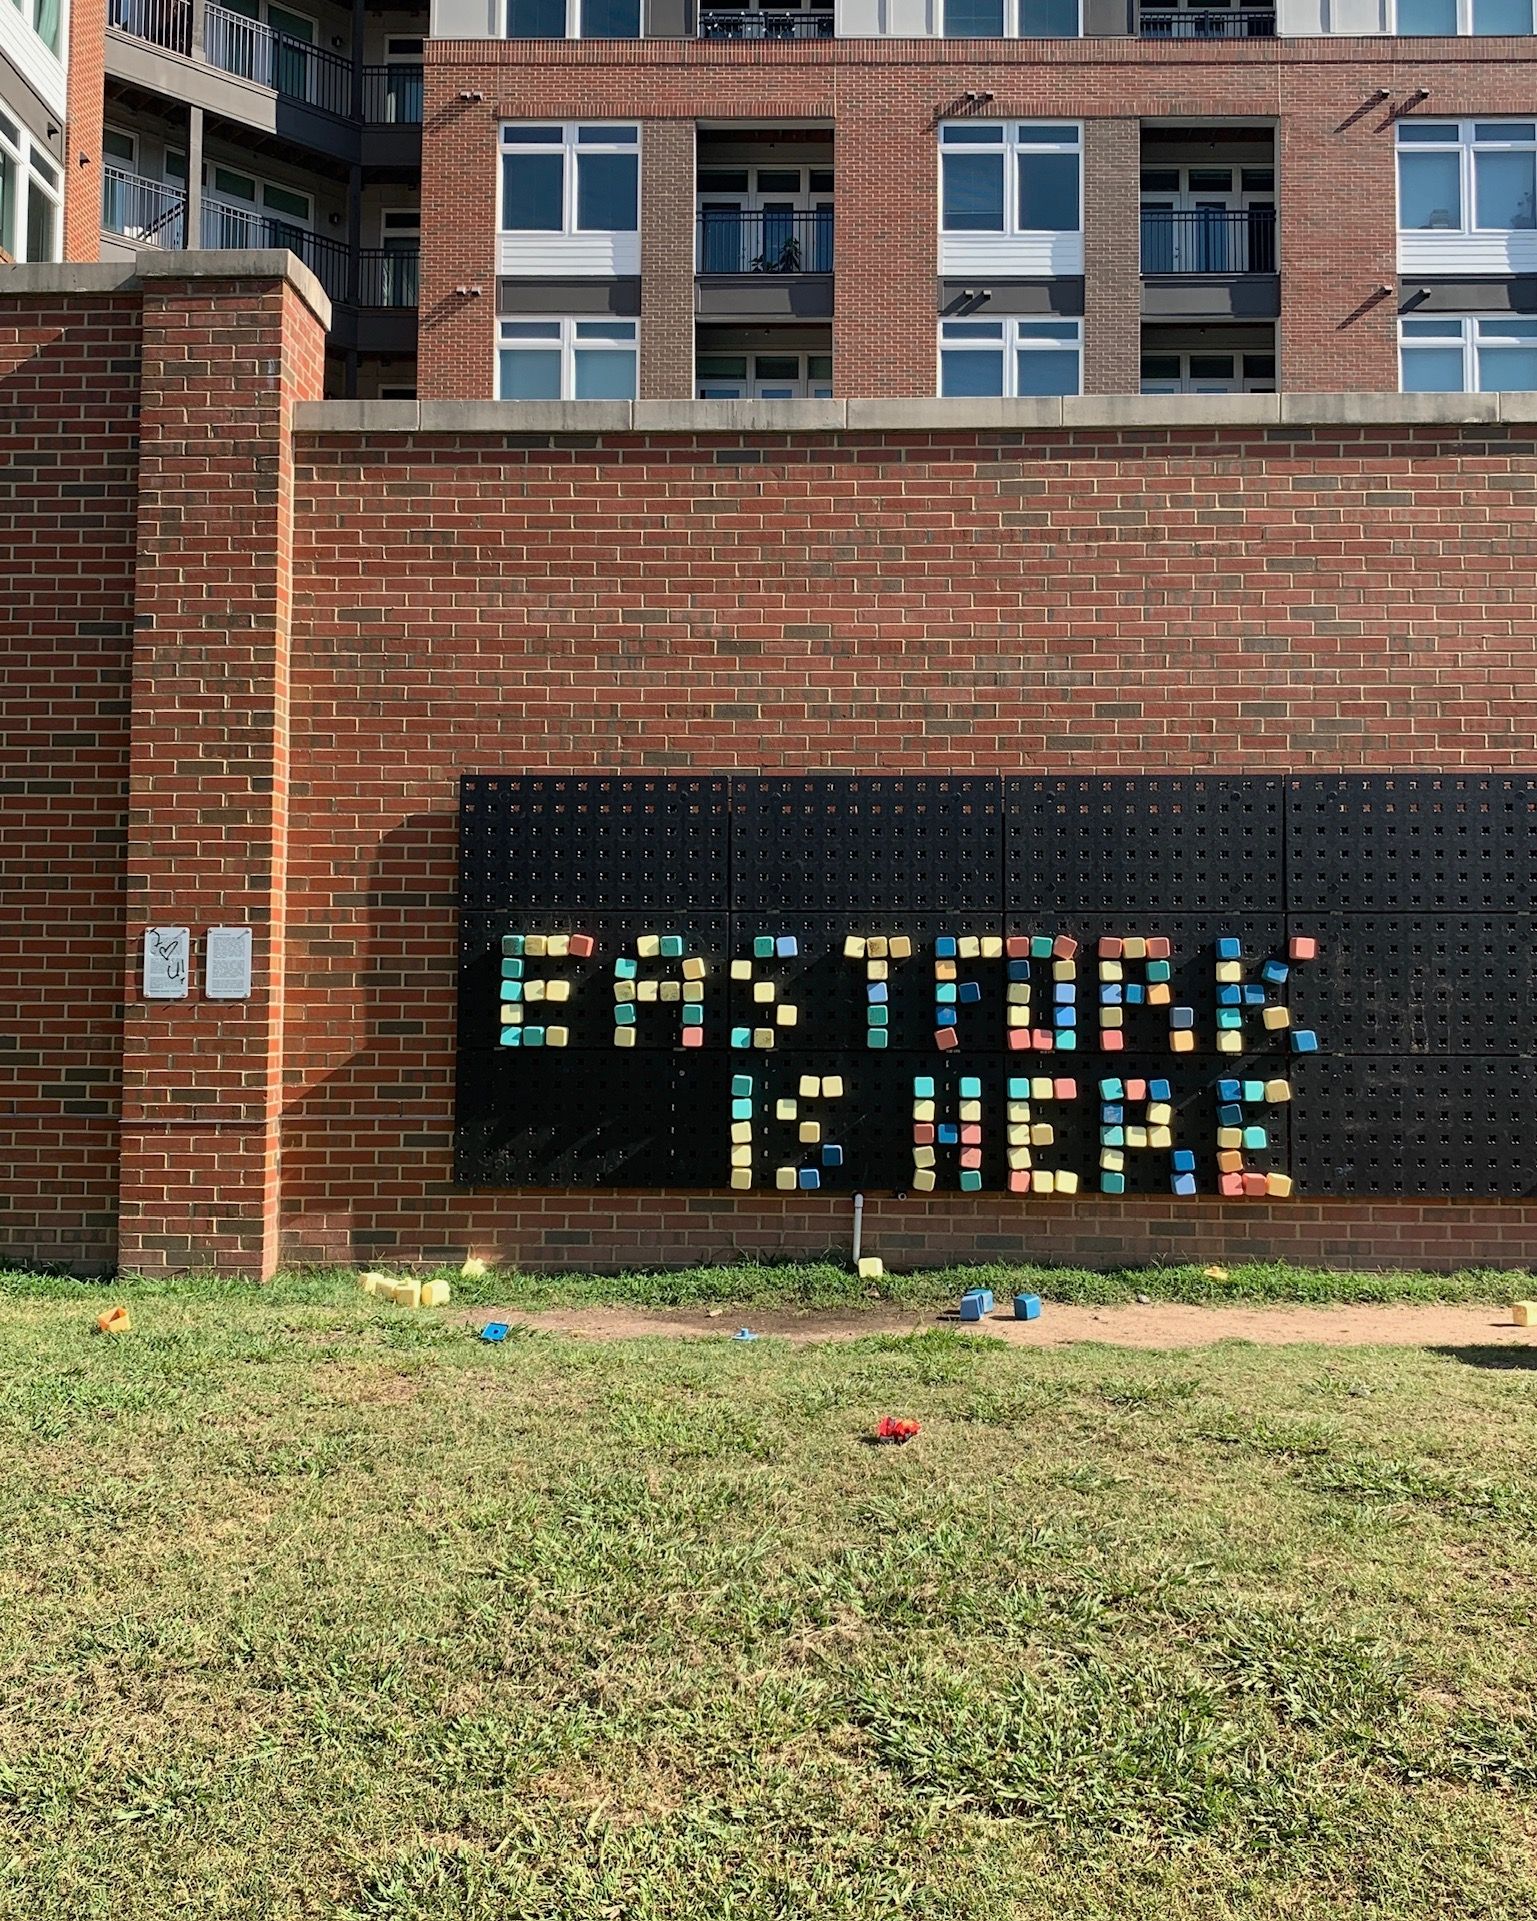 Outside, there is a peg board sign with colorful blocks that reads "East Fork is Here"